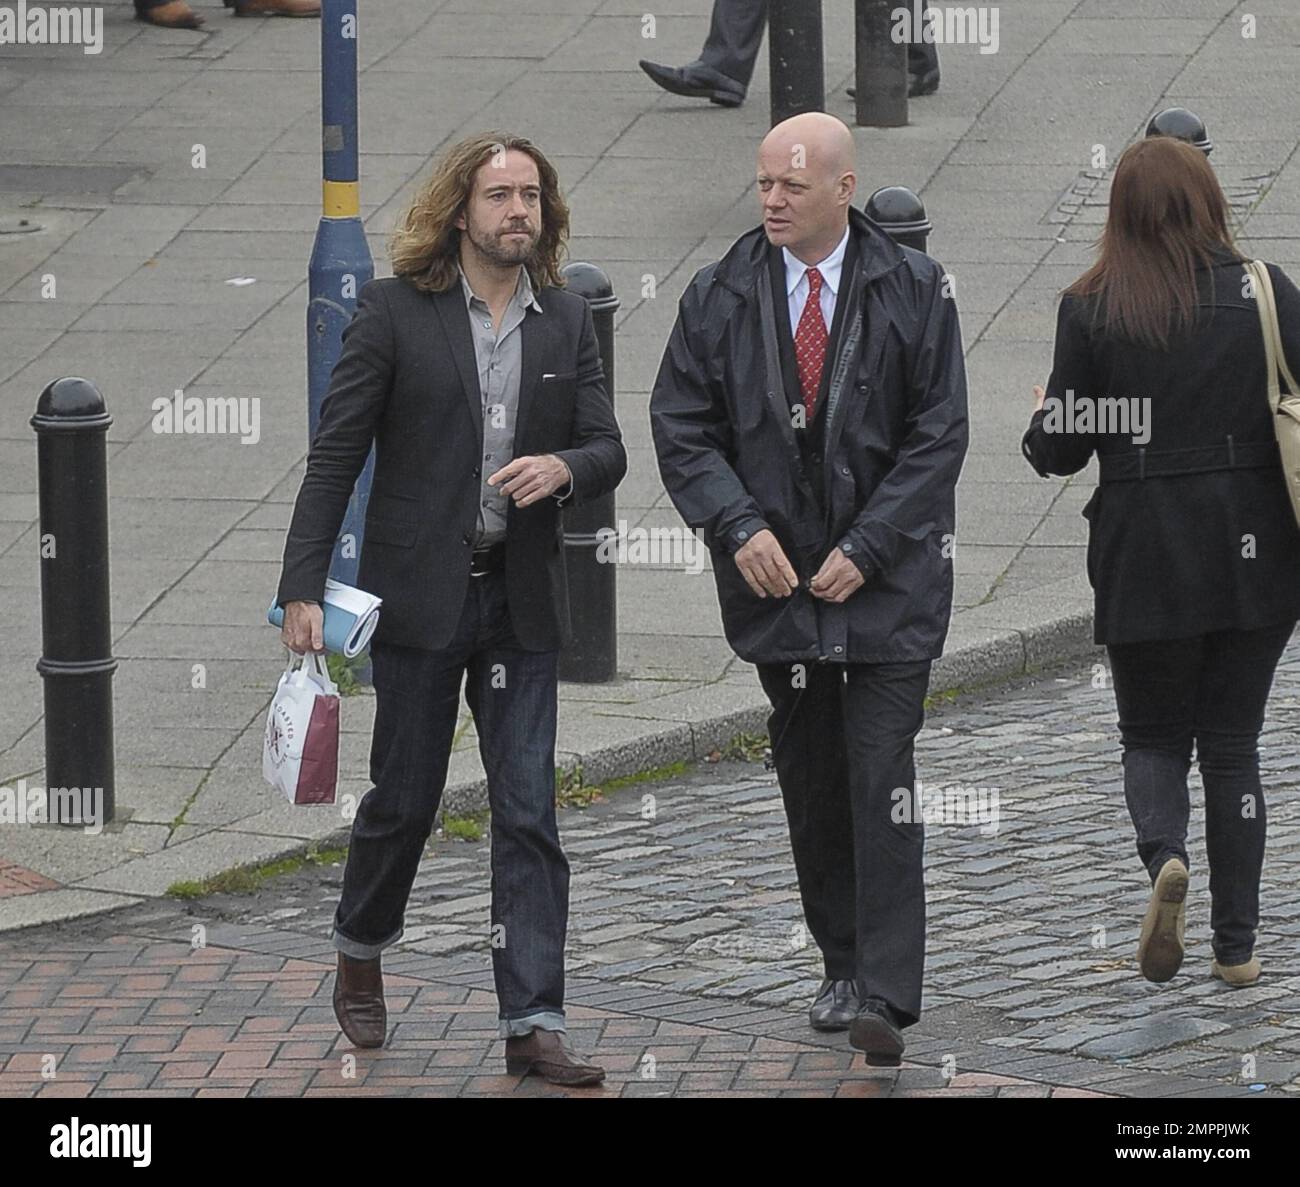 Justin Lee Collins was seen leaving St Albans Crown Court after the jurors were sent home due to one of them being ill. They jury is still deliberating on the harassment case against Collins brought upon by his ex-girlfriend Anna Larke. The jury is expected to return to court on Tuesday to continue deliberating. London, UK. 8th October 2012. Stock Photo